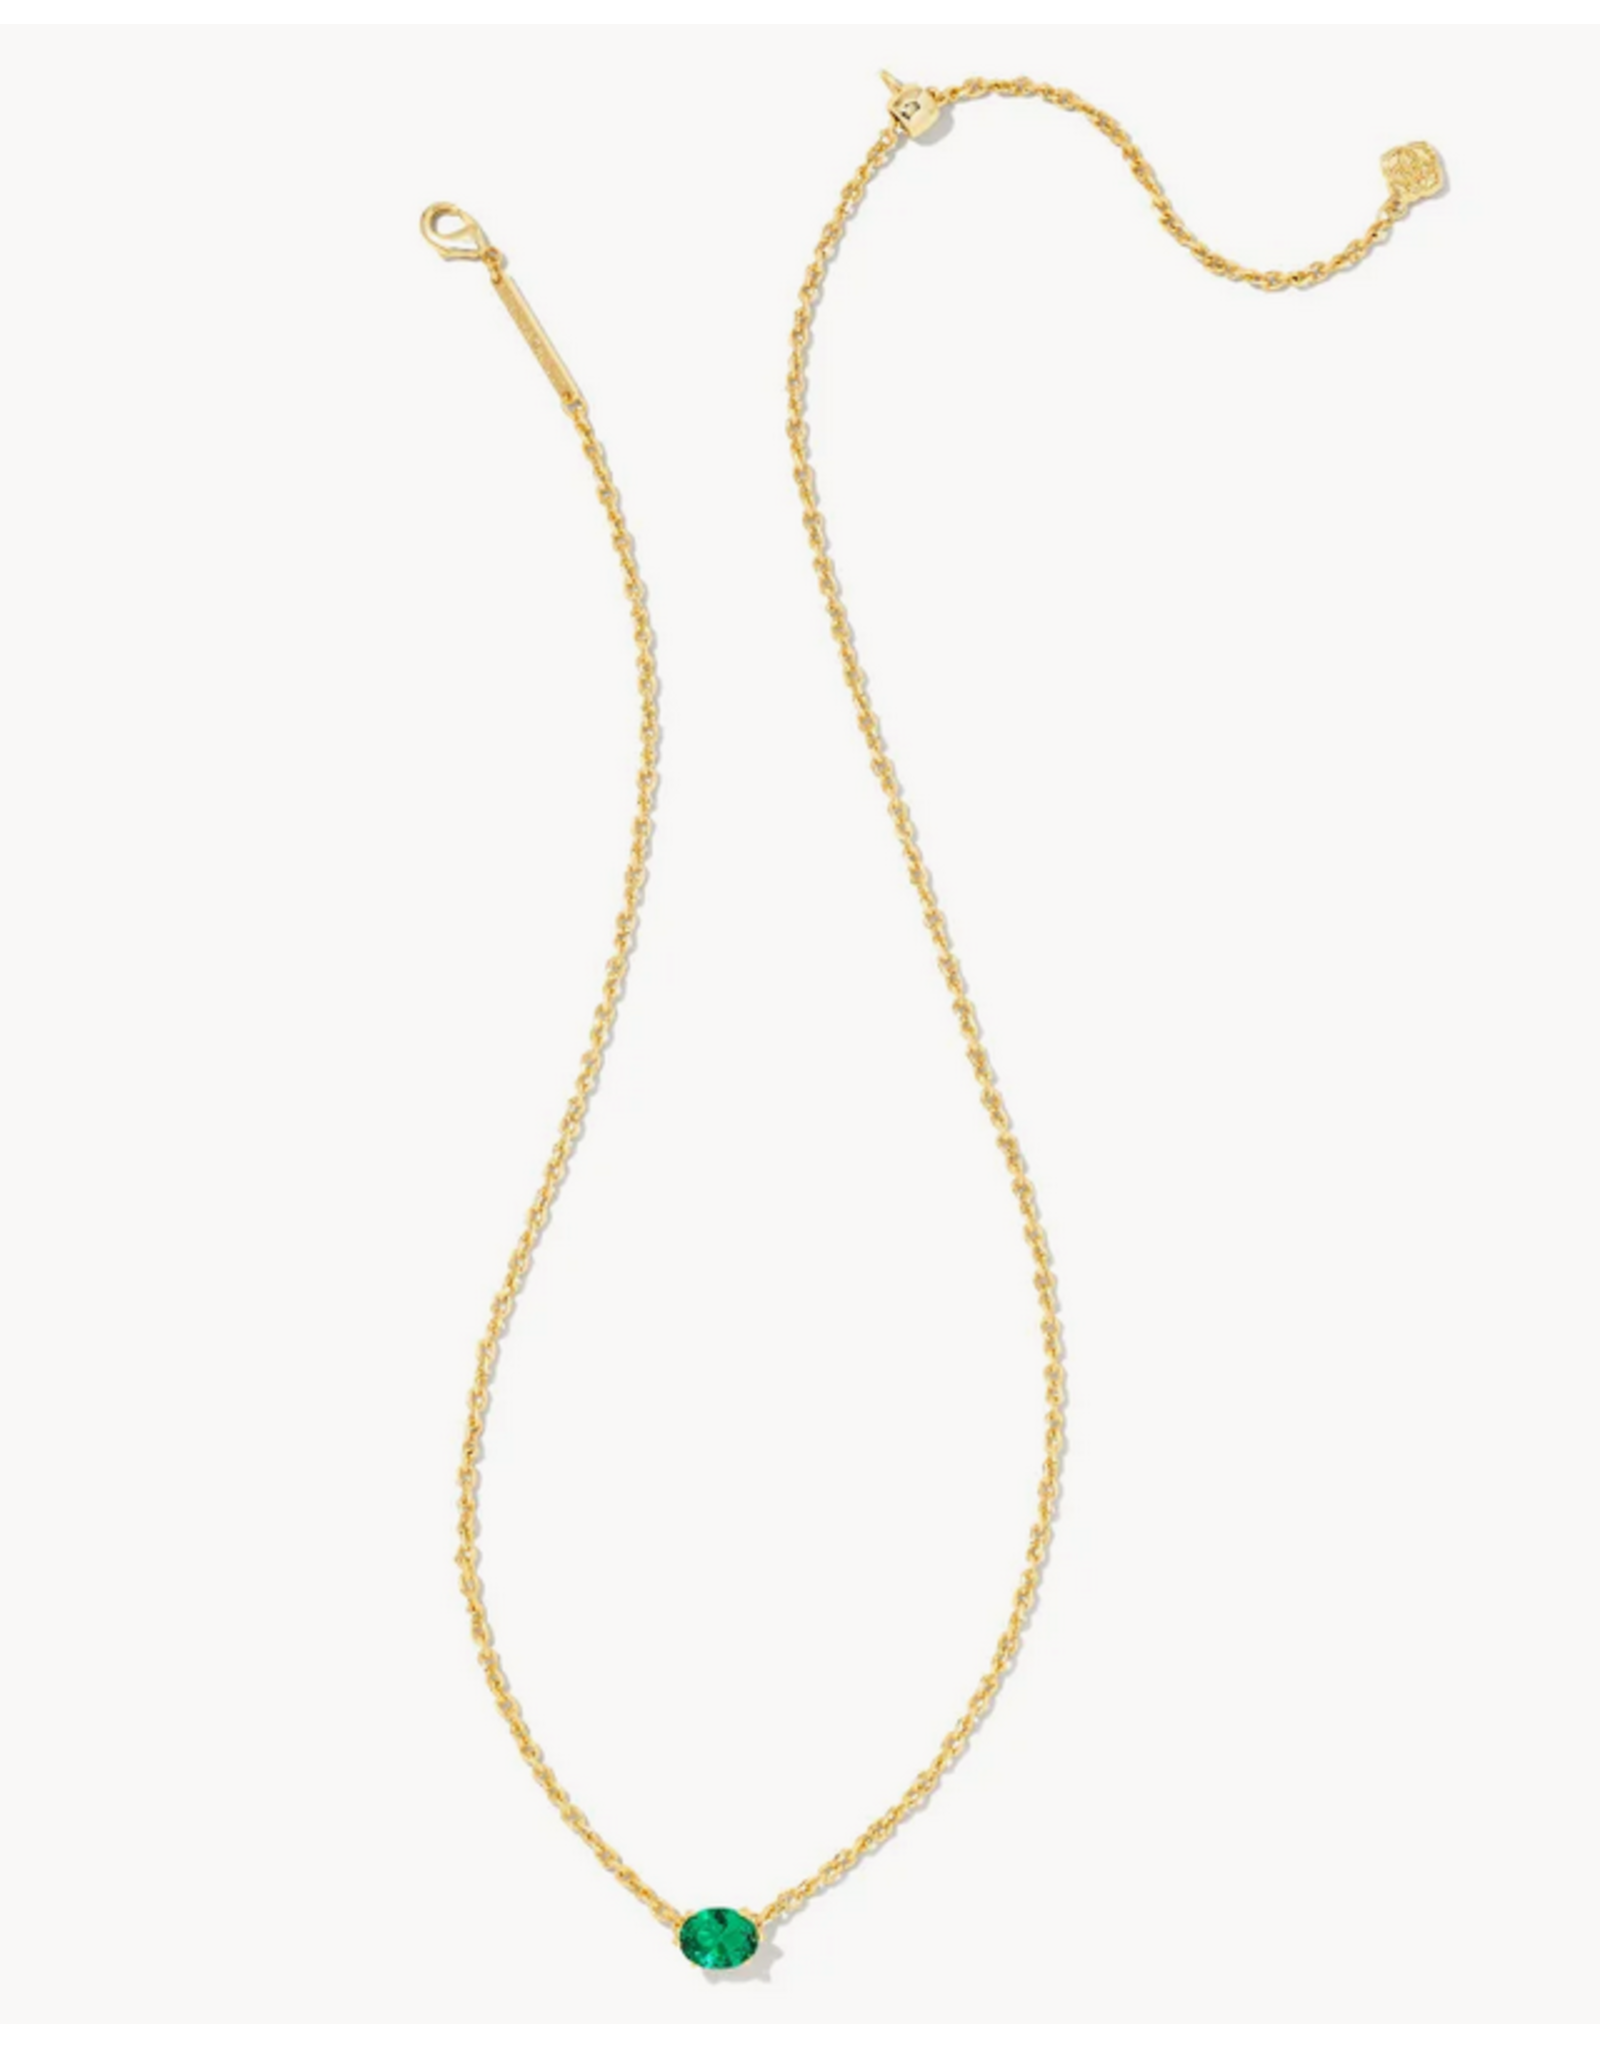 Kendra Scott Blair Yellow Gold Plated Pendant Necklace in Emerald Crystal |  9608802871 | Borsheims